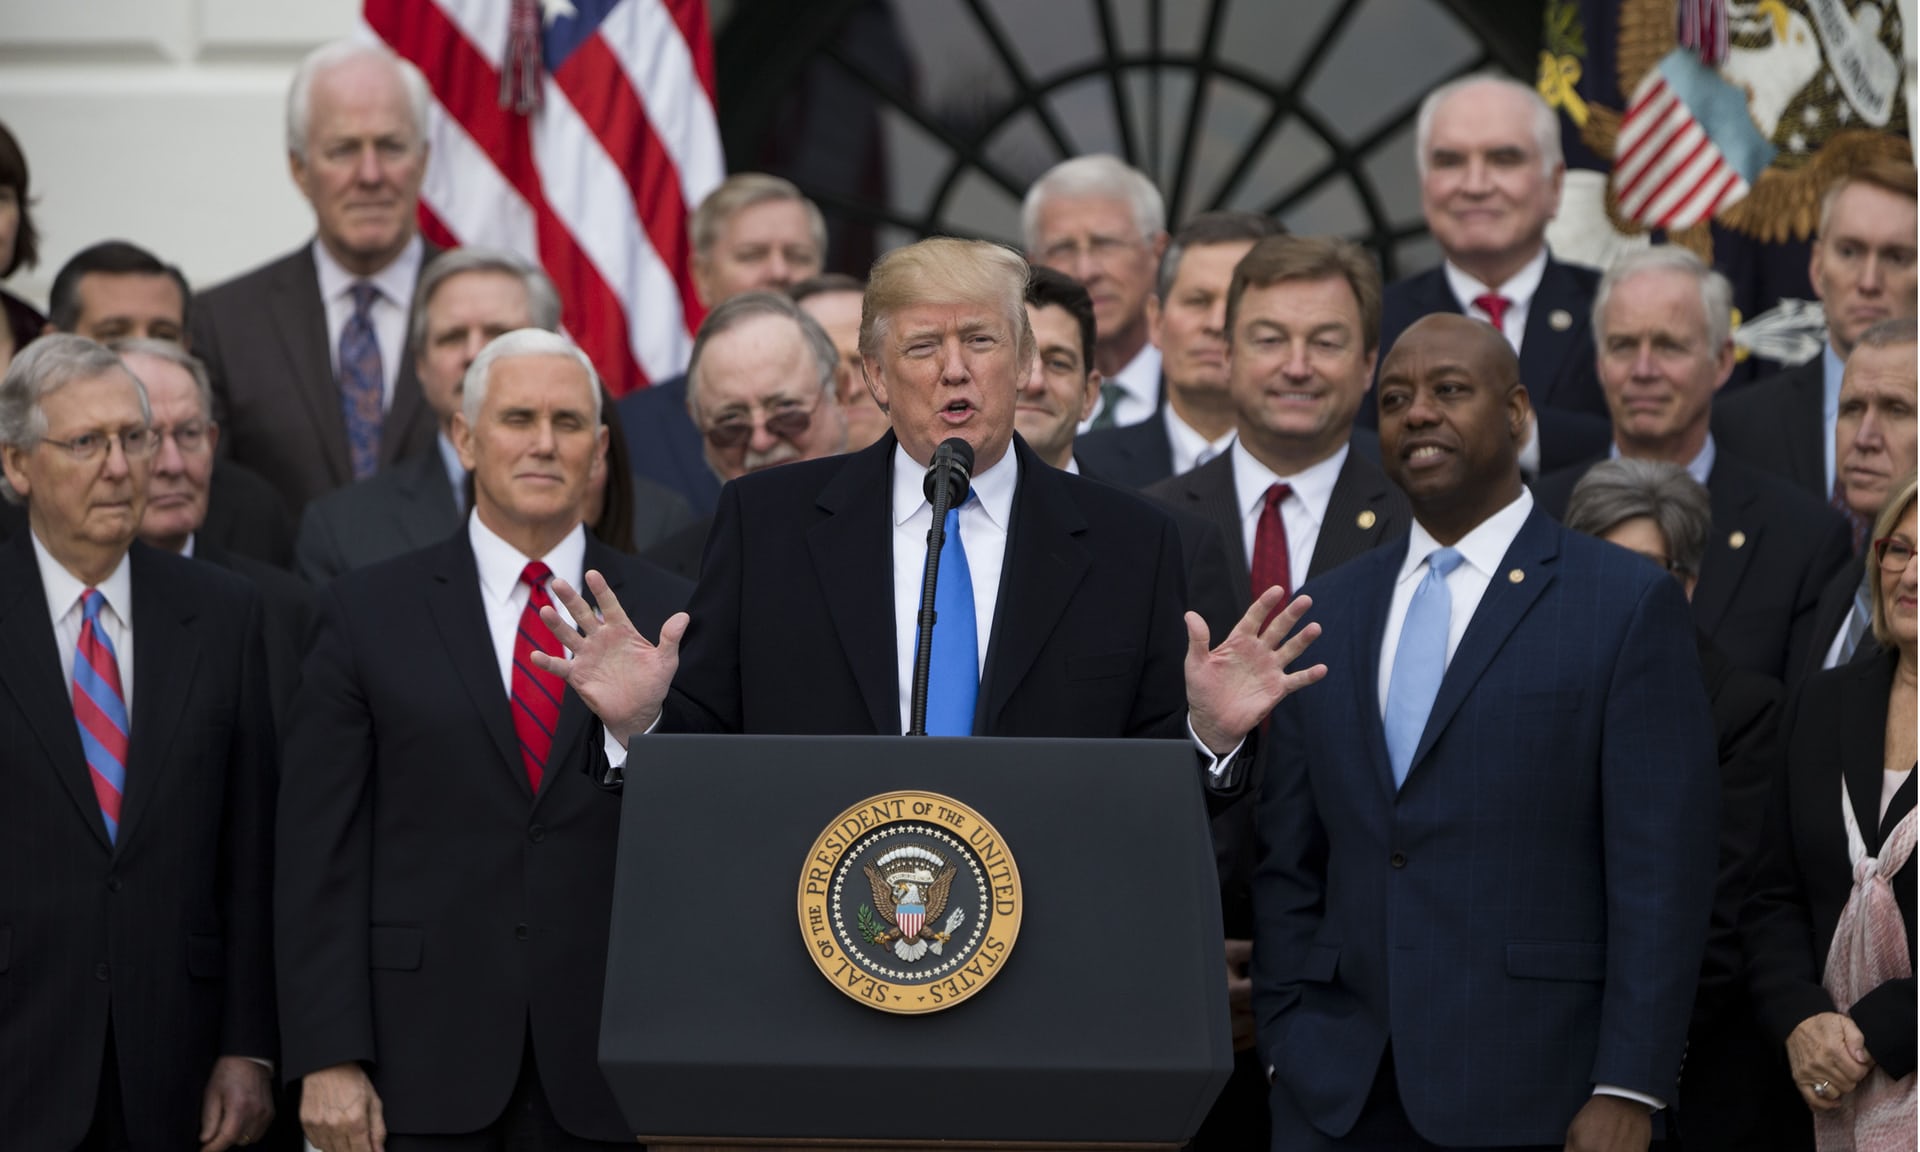 Donald Trump speaks on the south lawn of the White House after Congress passed the Republican sponsored the ‘Tax Cuts and Jobs Act’ on 20 December 2017. Photograph: REX/Shutterstock